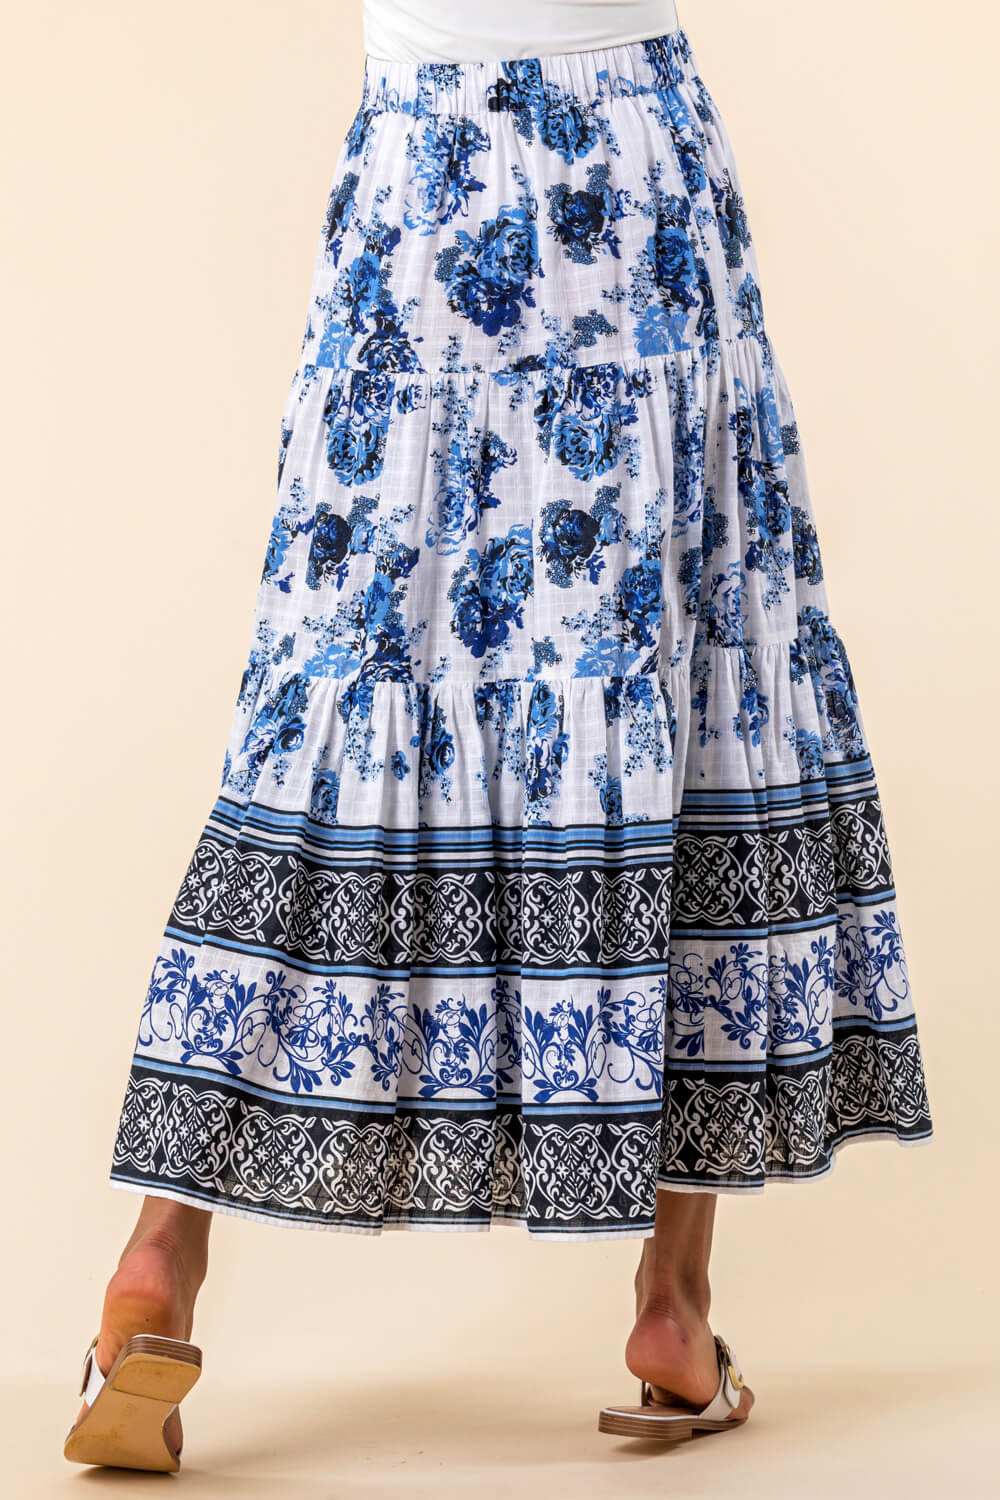 Blue Floral Contrast Print Tiered Cotton Skirt, Image 2 of 4